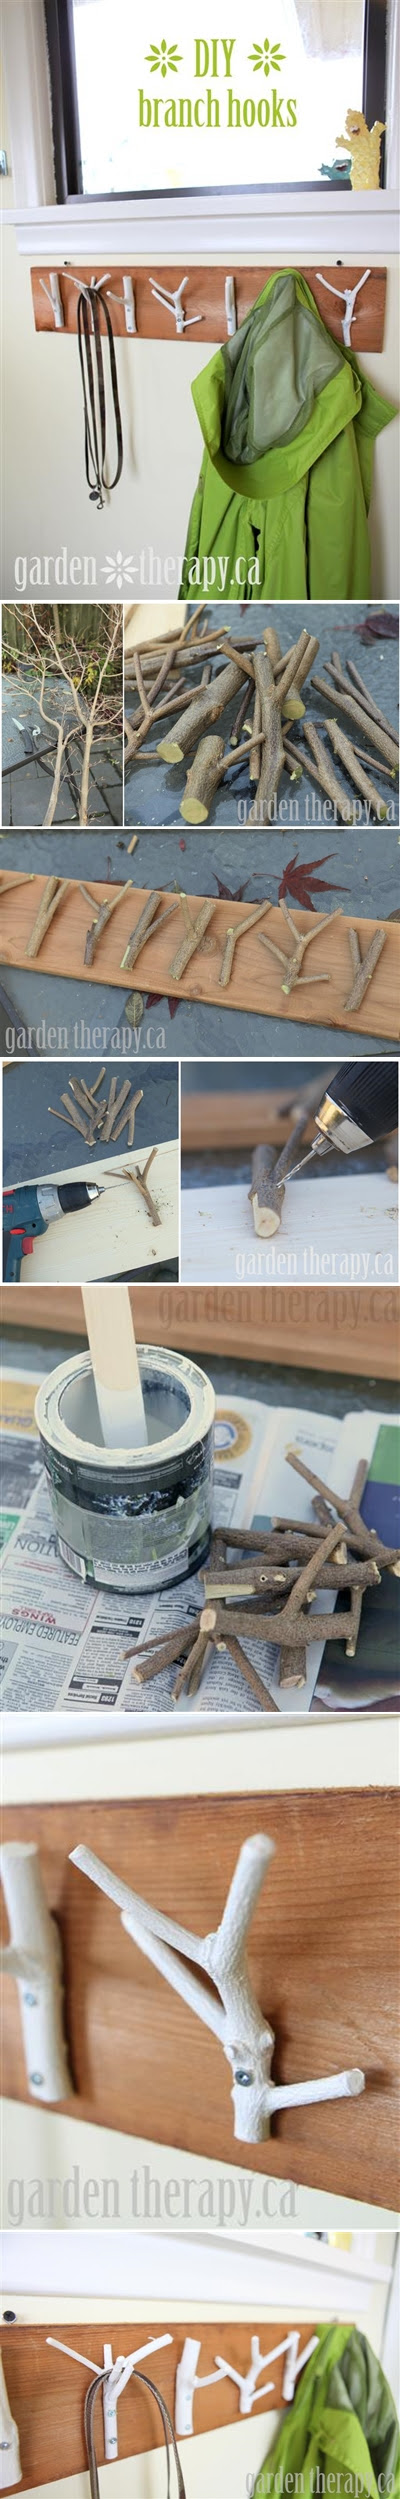 How to make cool DIY coat racks with branches step by step tutorial instructions